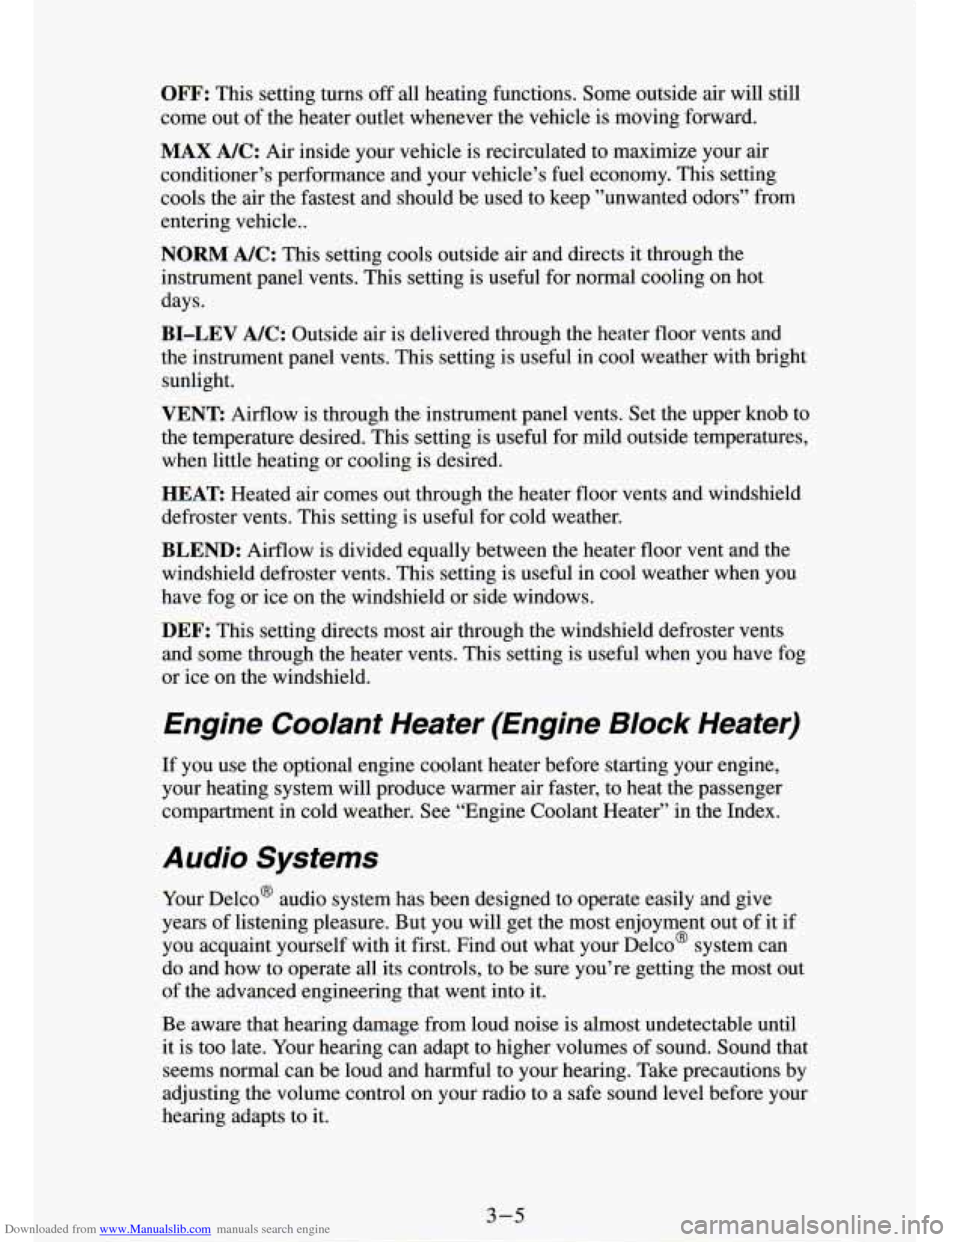 CHEVROLET S10 1994 2.G Owners Manual Downloaded from www.Manualslib.com manuals search engine Engine  Coolant  Heater  (Engine  Block  Heater) 
If you  use  the  optional engine coolant  heater  before  starting  your  engine, 
your  hea